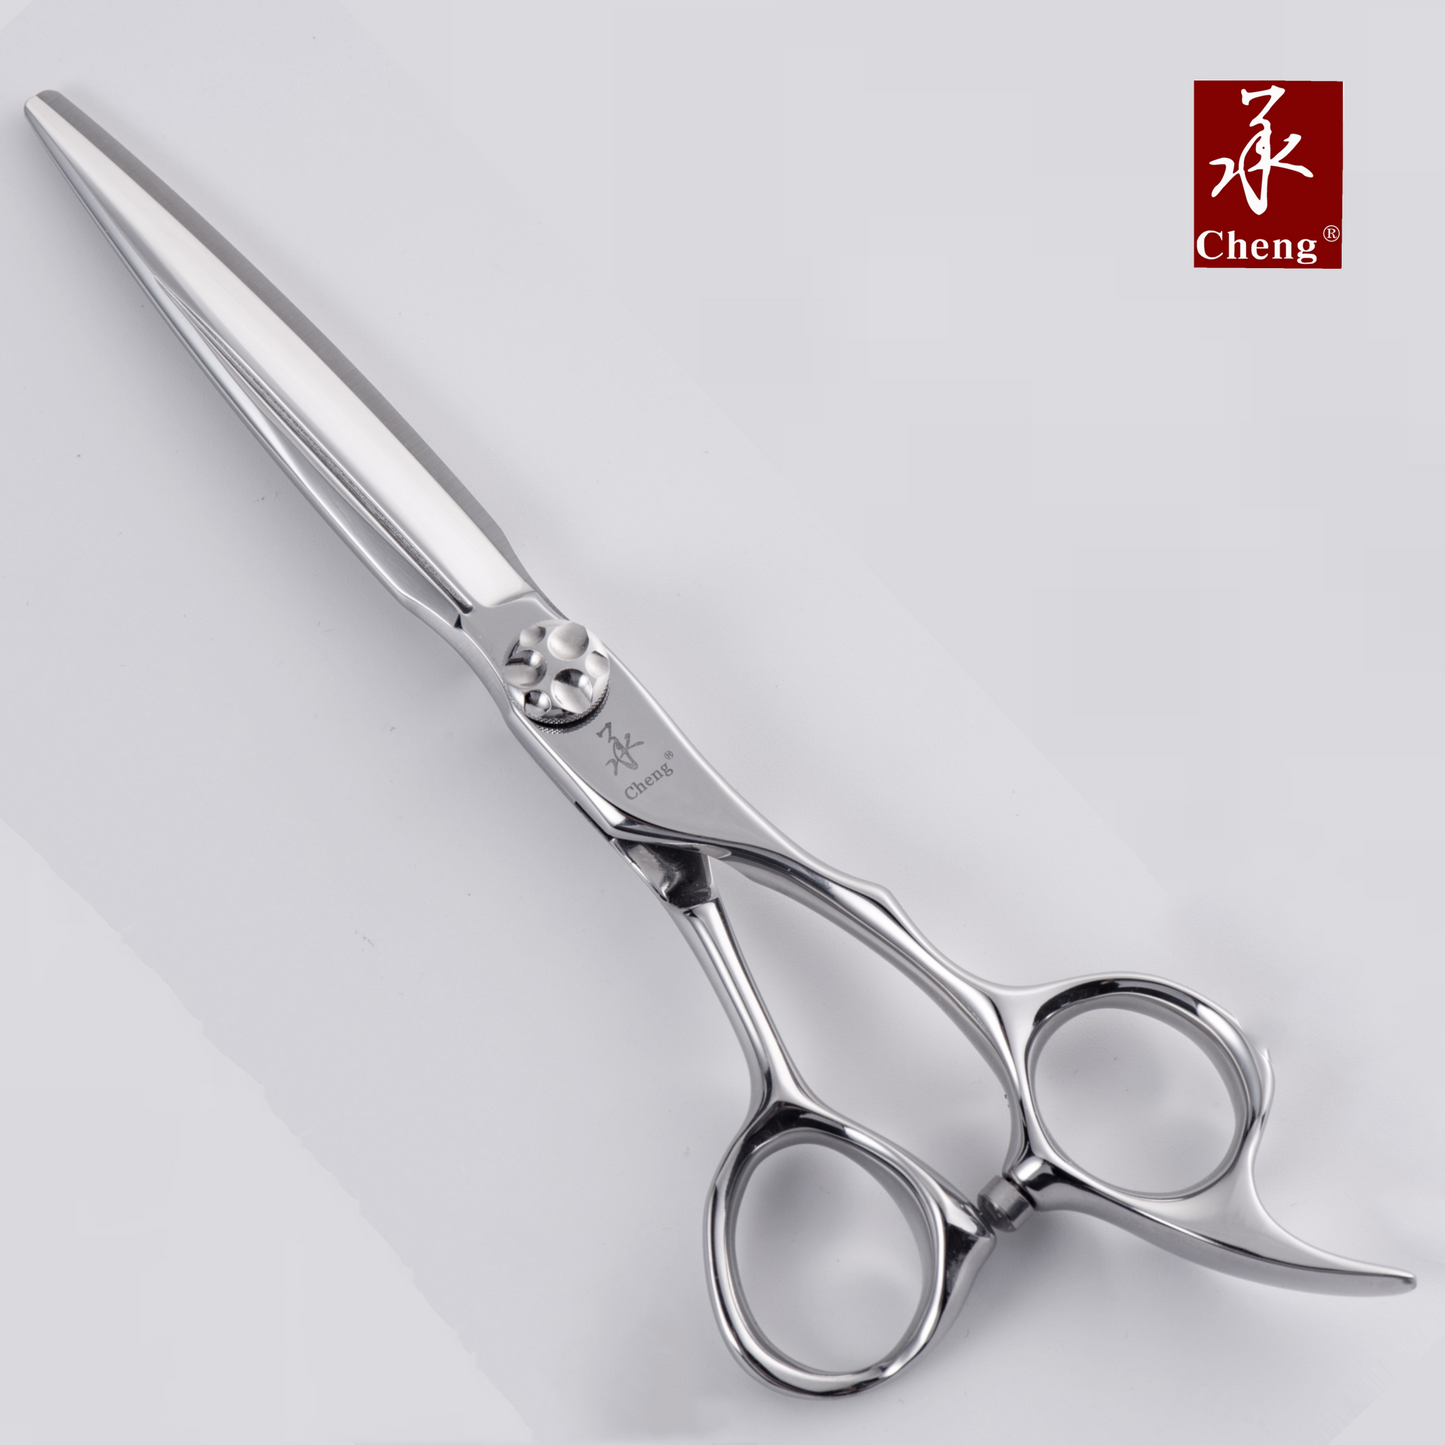 VD-623TZX Hair Thinning Scissors 6.0 Inch 23T About=25%~30%